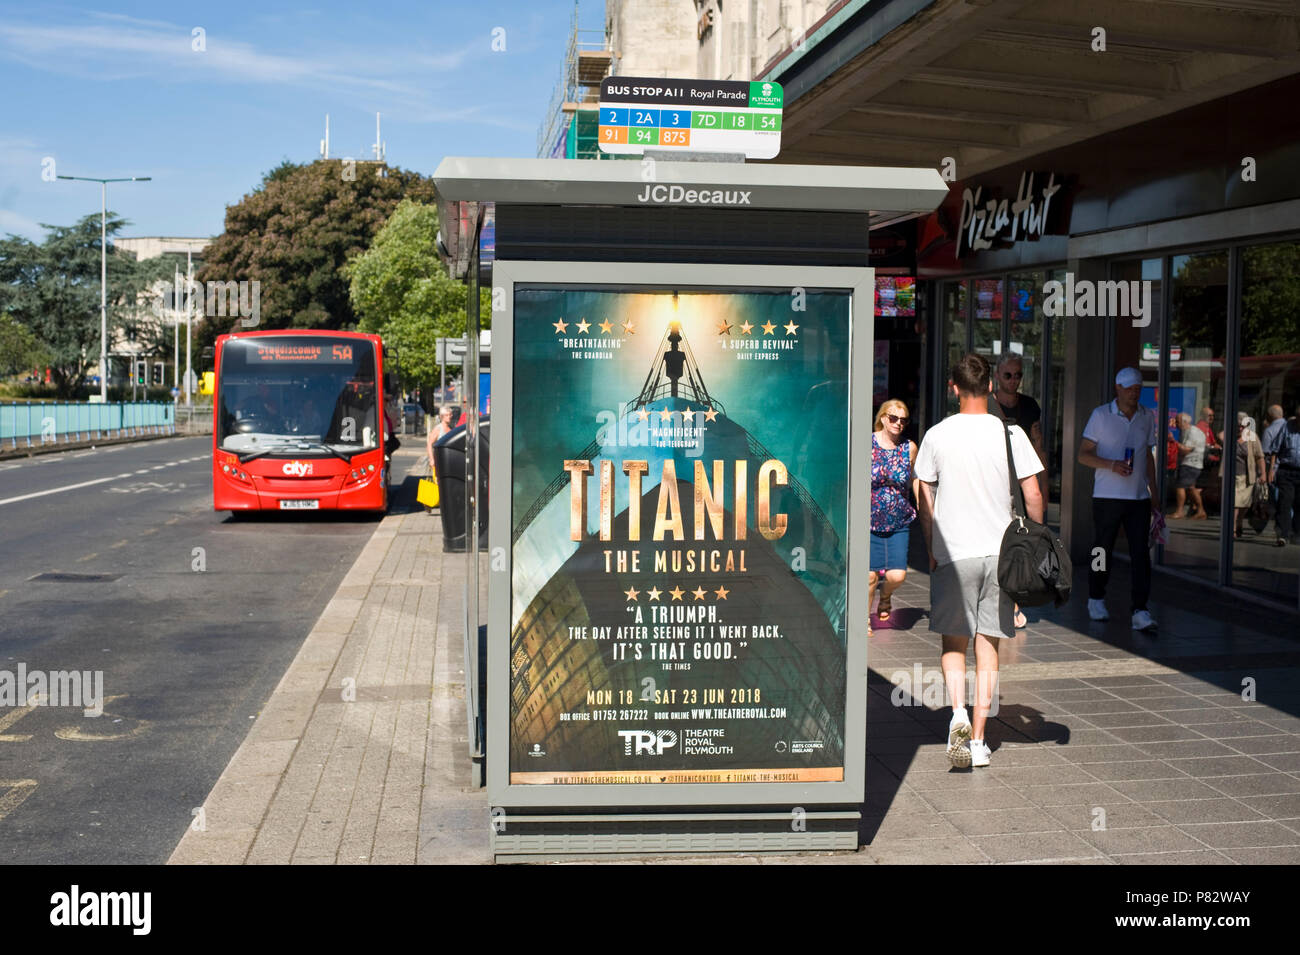 JCDecaux roadside bus stop billboard site advertising Titanic the musical in Plymouth Devon England UK Stock Photo